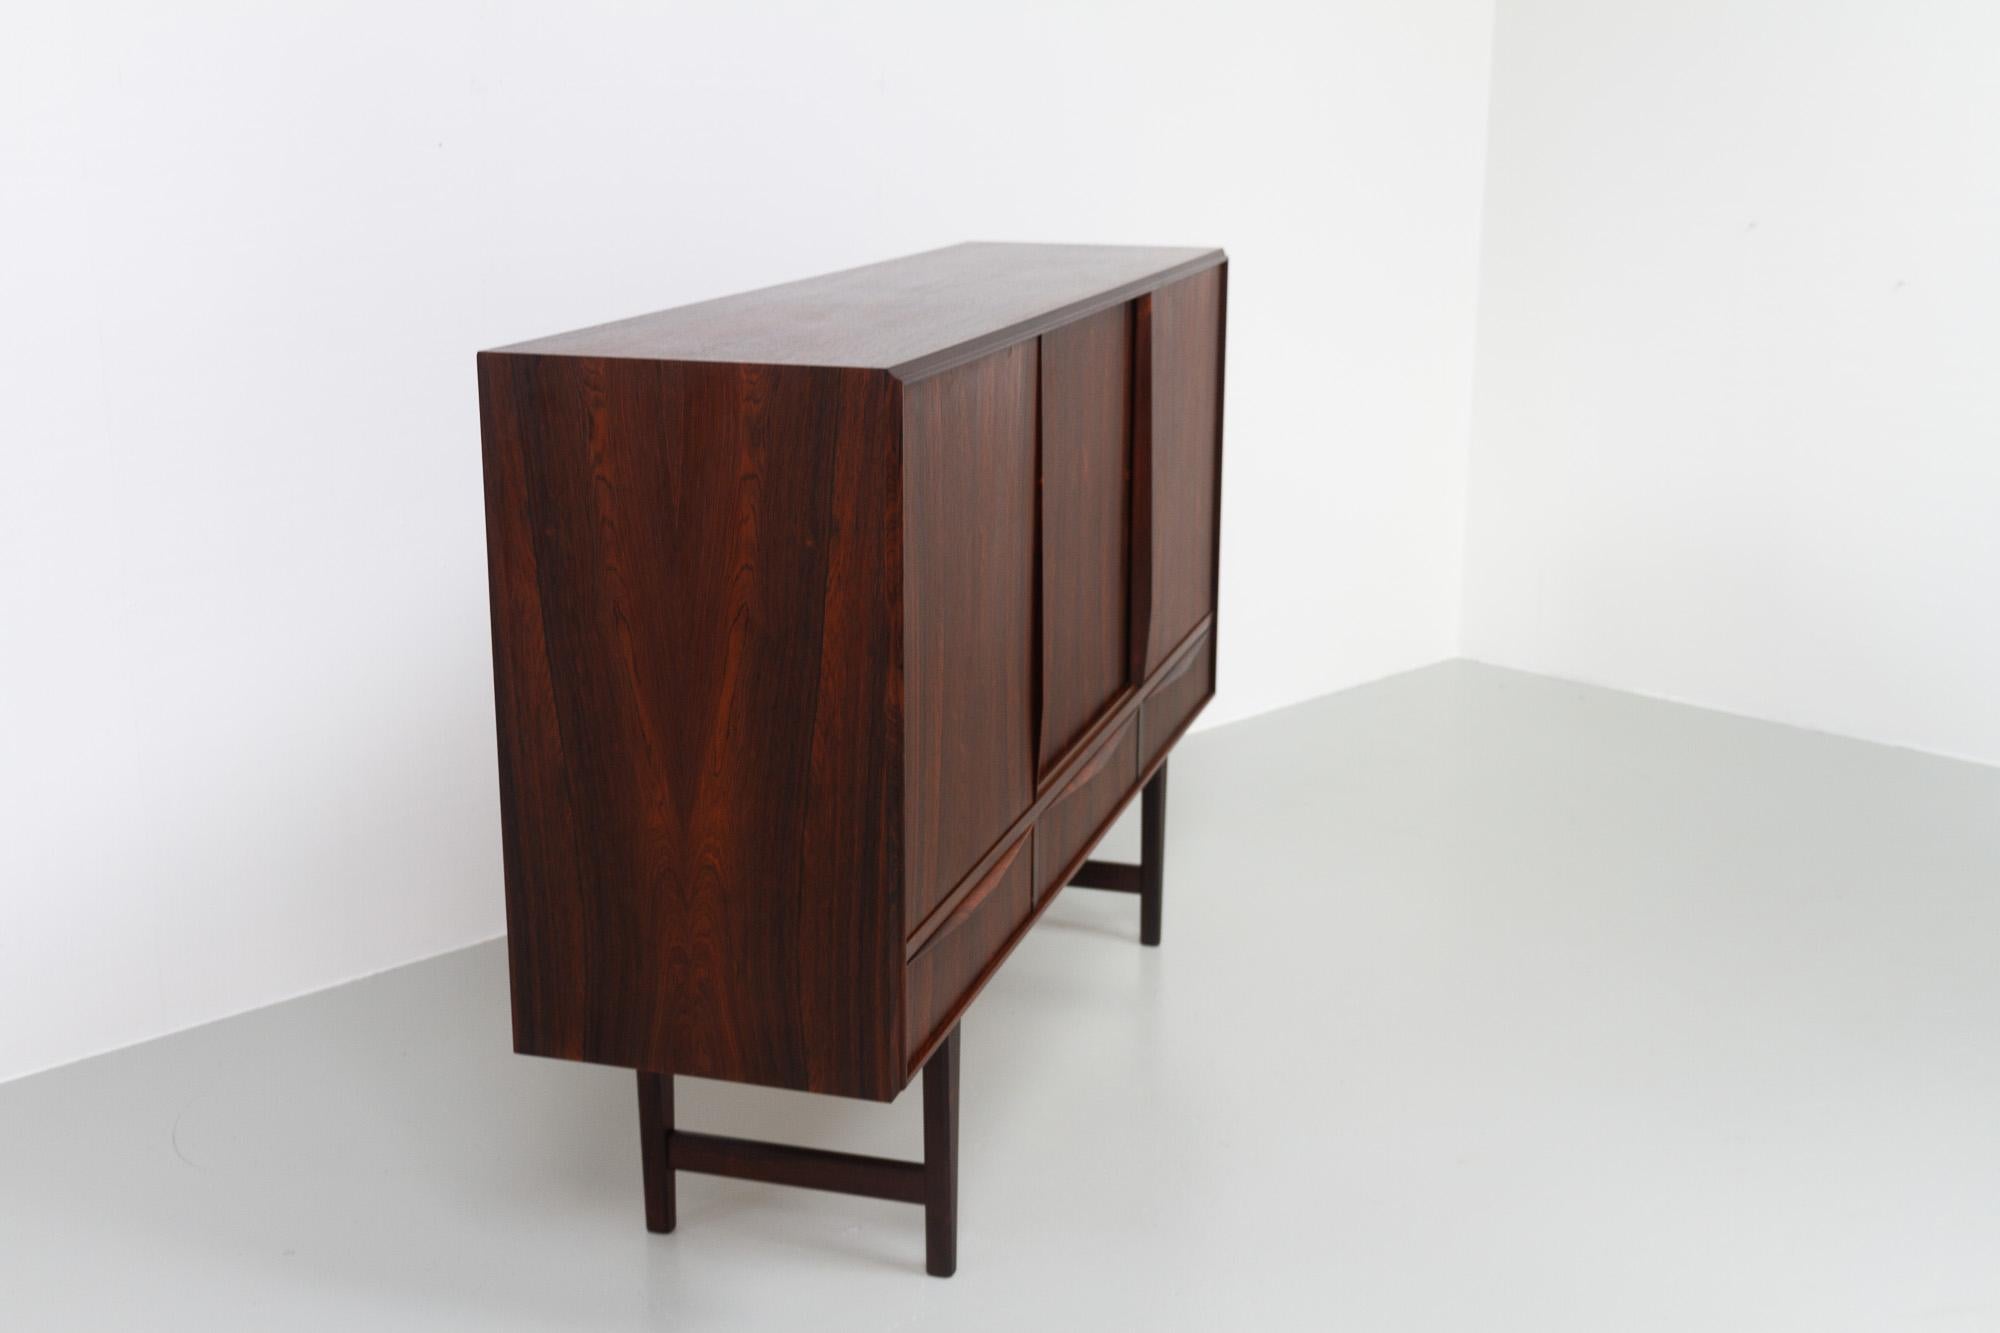 Mid-Century Danish Rosewood Sideboard by EW Bach for Sejling Skabe, 1960s.

Very beautiful and impressive Danish Modern credenza with stunning Rosewood grain pattern. Exquisite craftsmanship and many beautiful details. This well sized cabinet offers